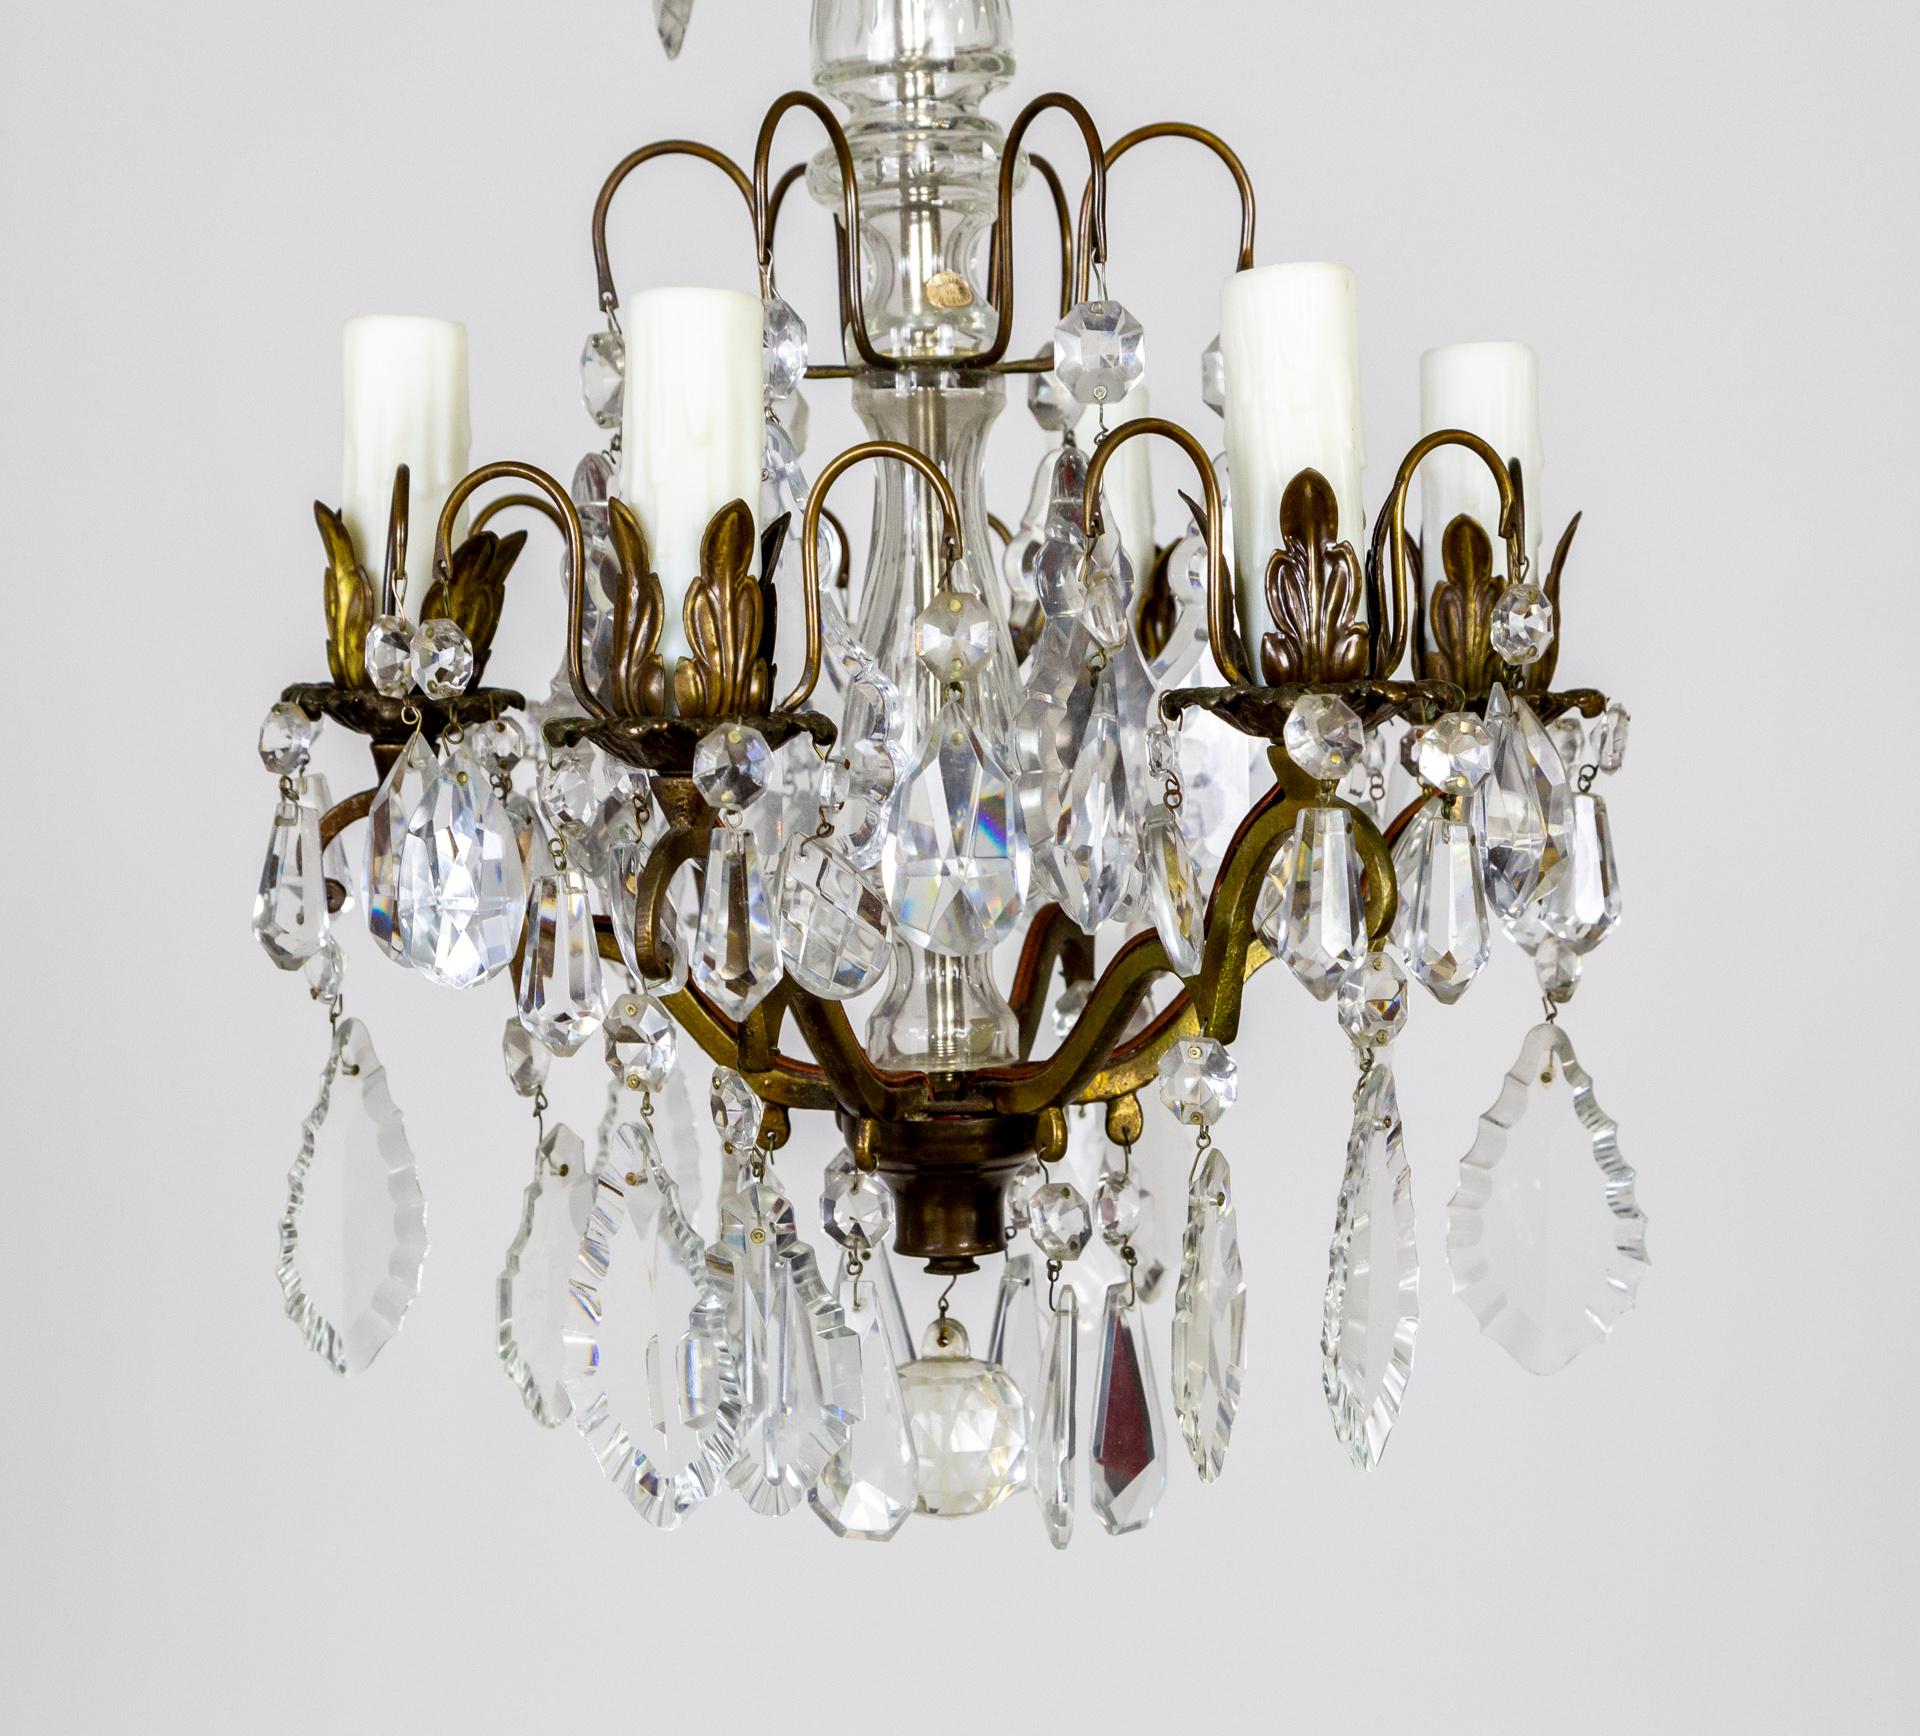 A compact, 6-light chandelier with high quality, faceted pendelogue and almond crystals and brass, acanthus leaf candle holders. Made in Austria, 1930s. 13.5